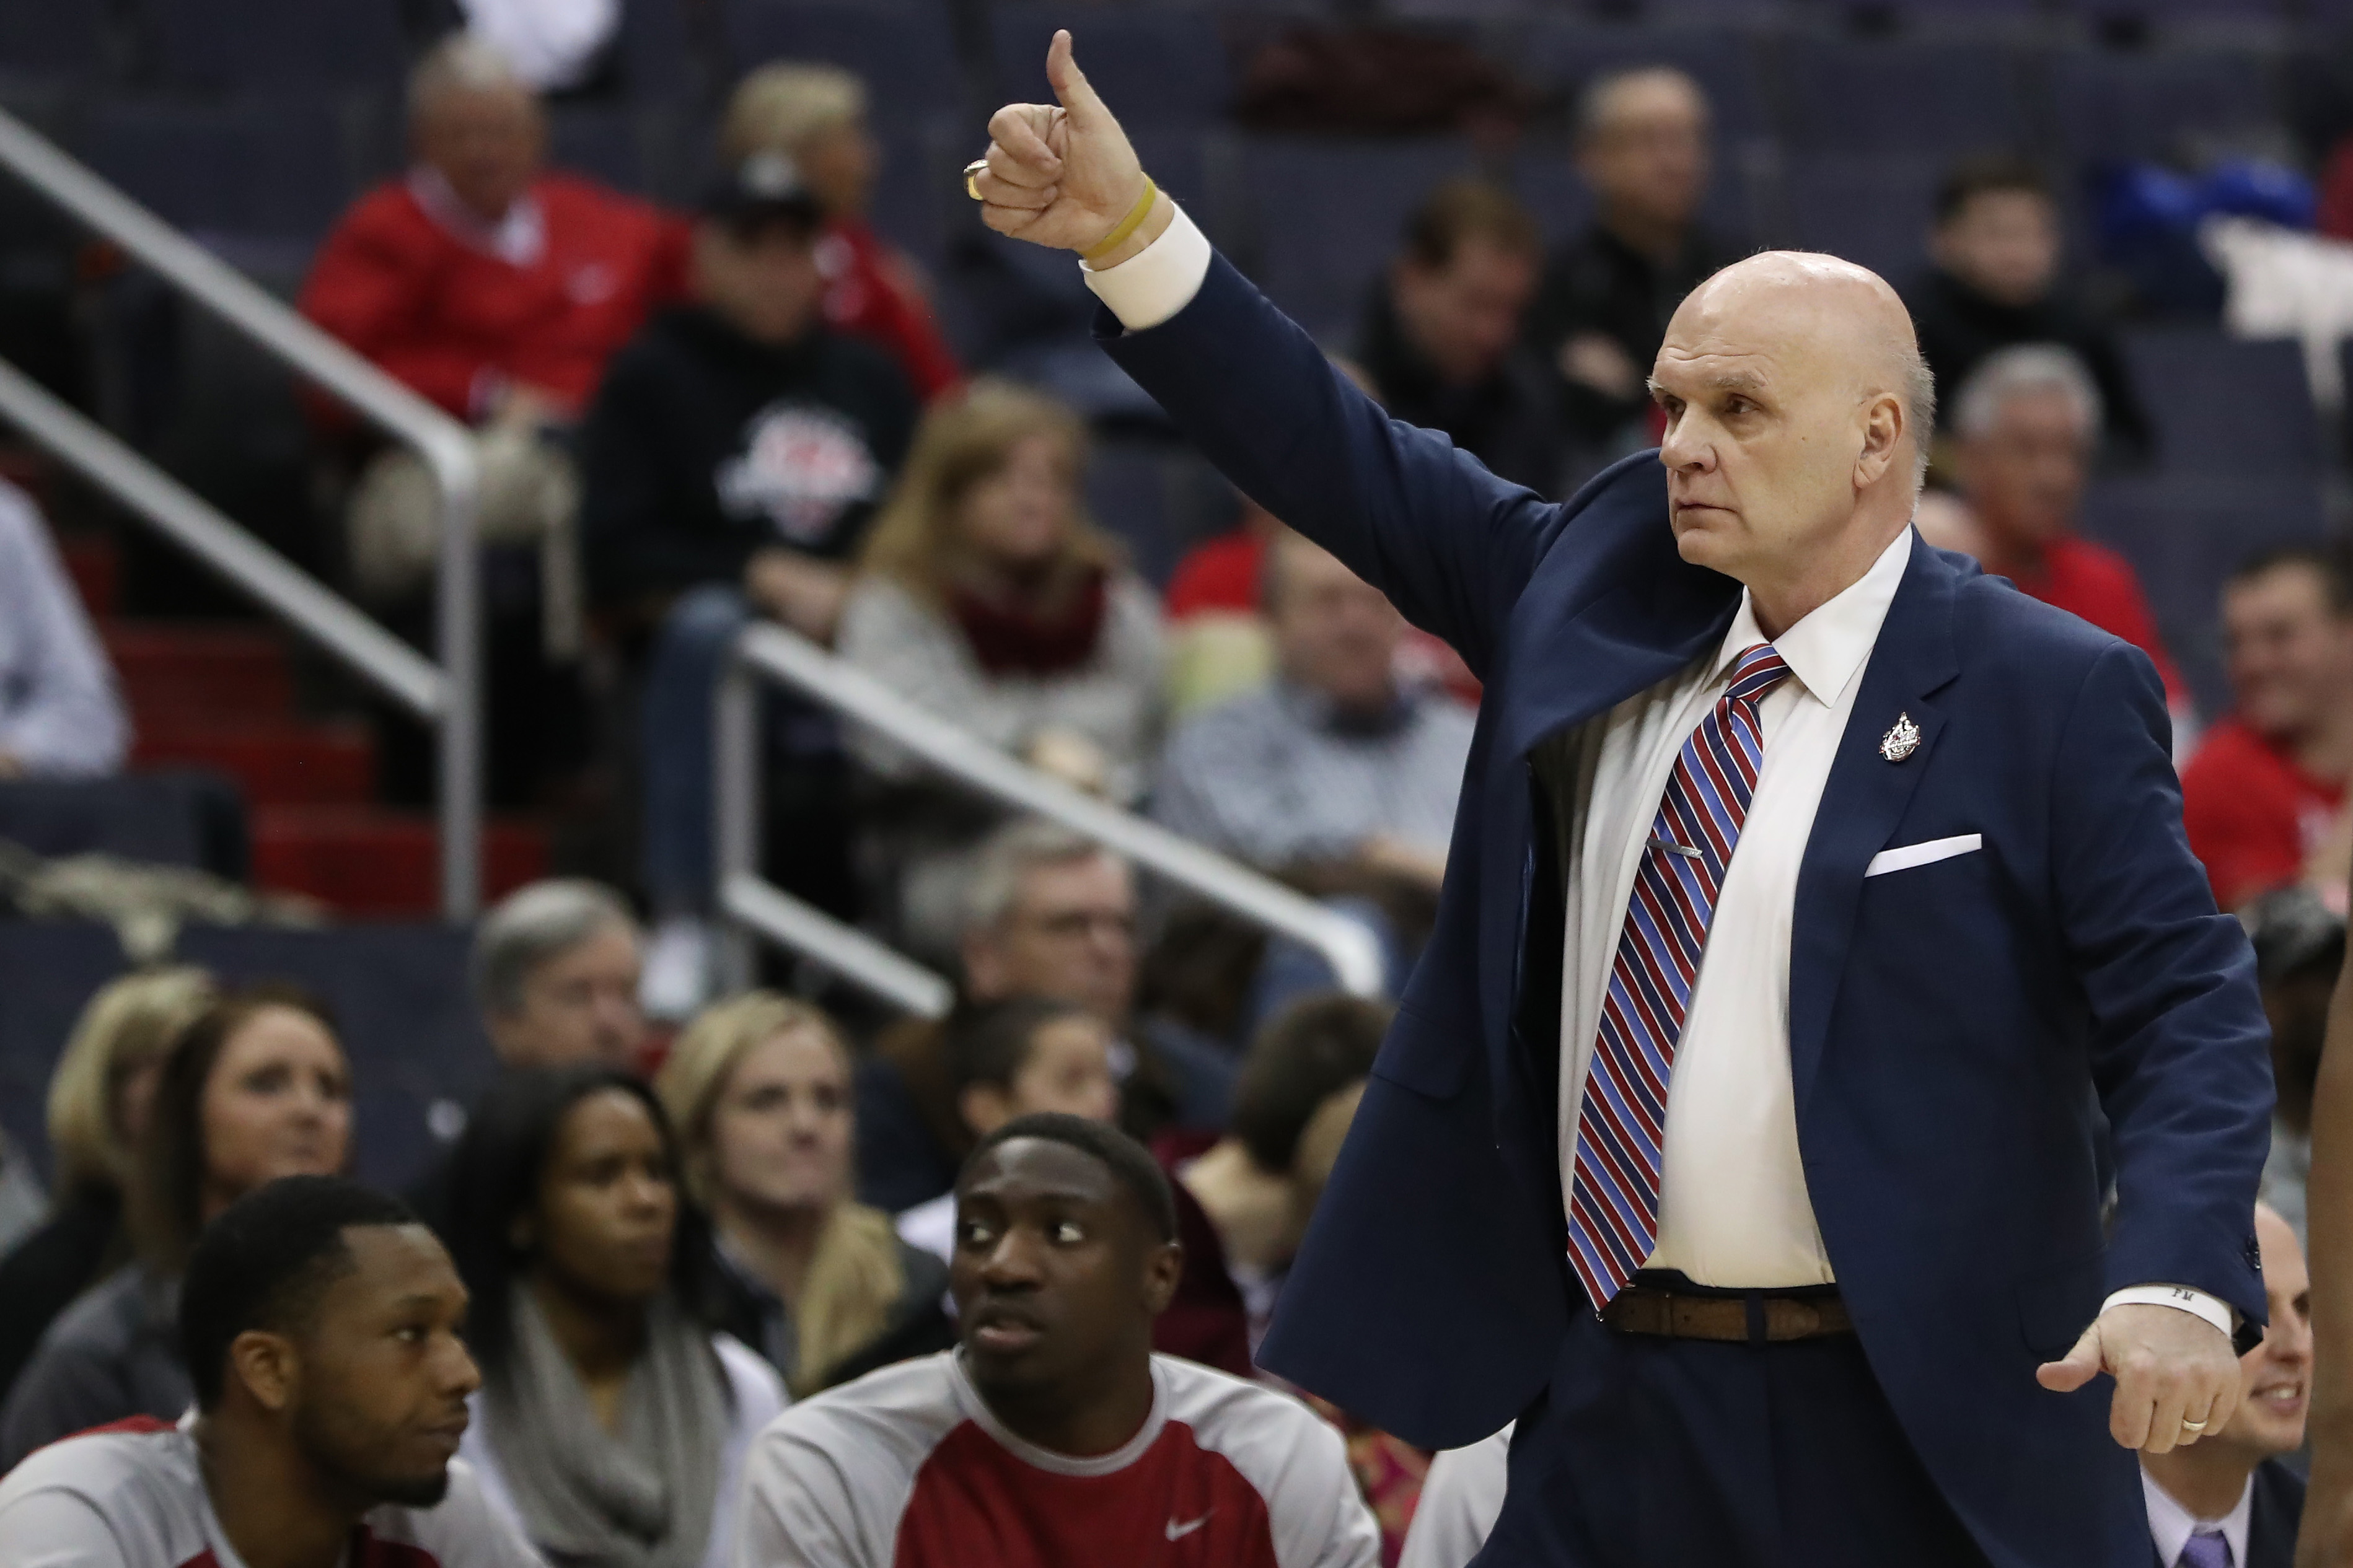 Phil Martelli to Michigan is a “Done Deal”